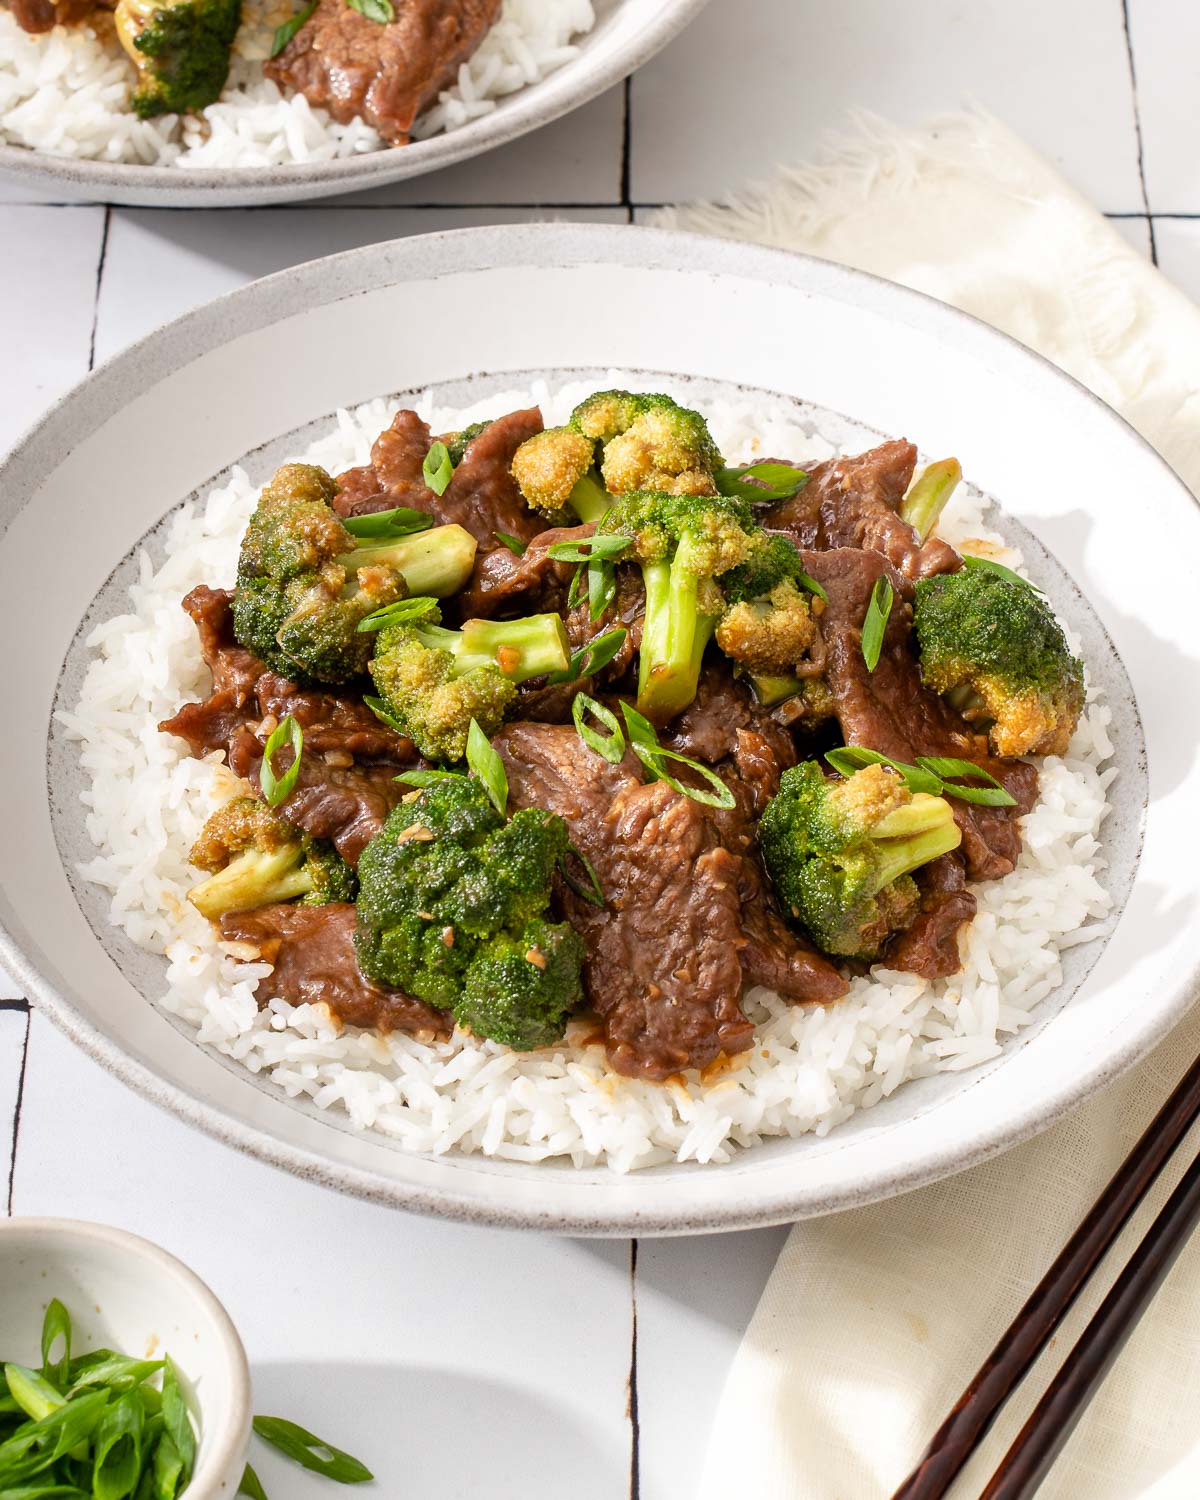 A plate of beef and broccoli served on a bed of white rice.